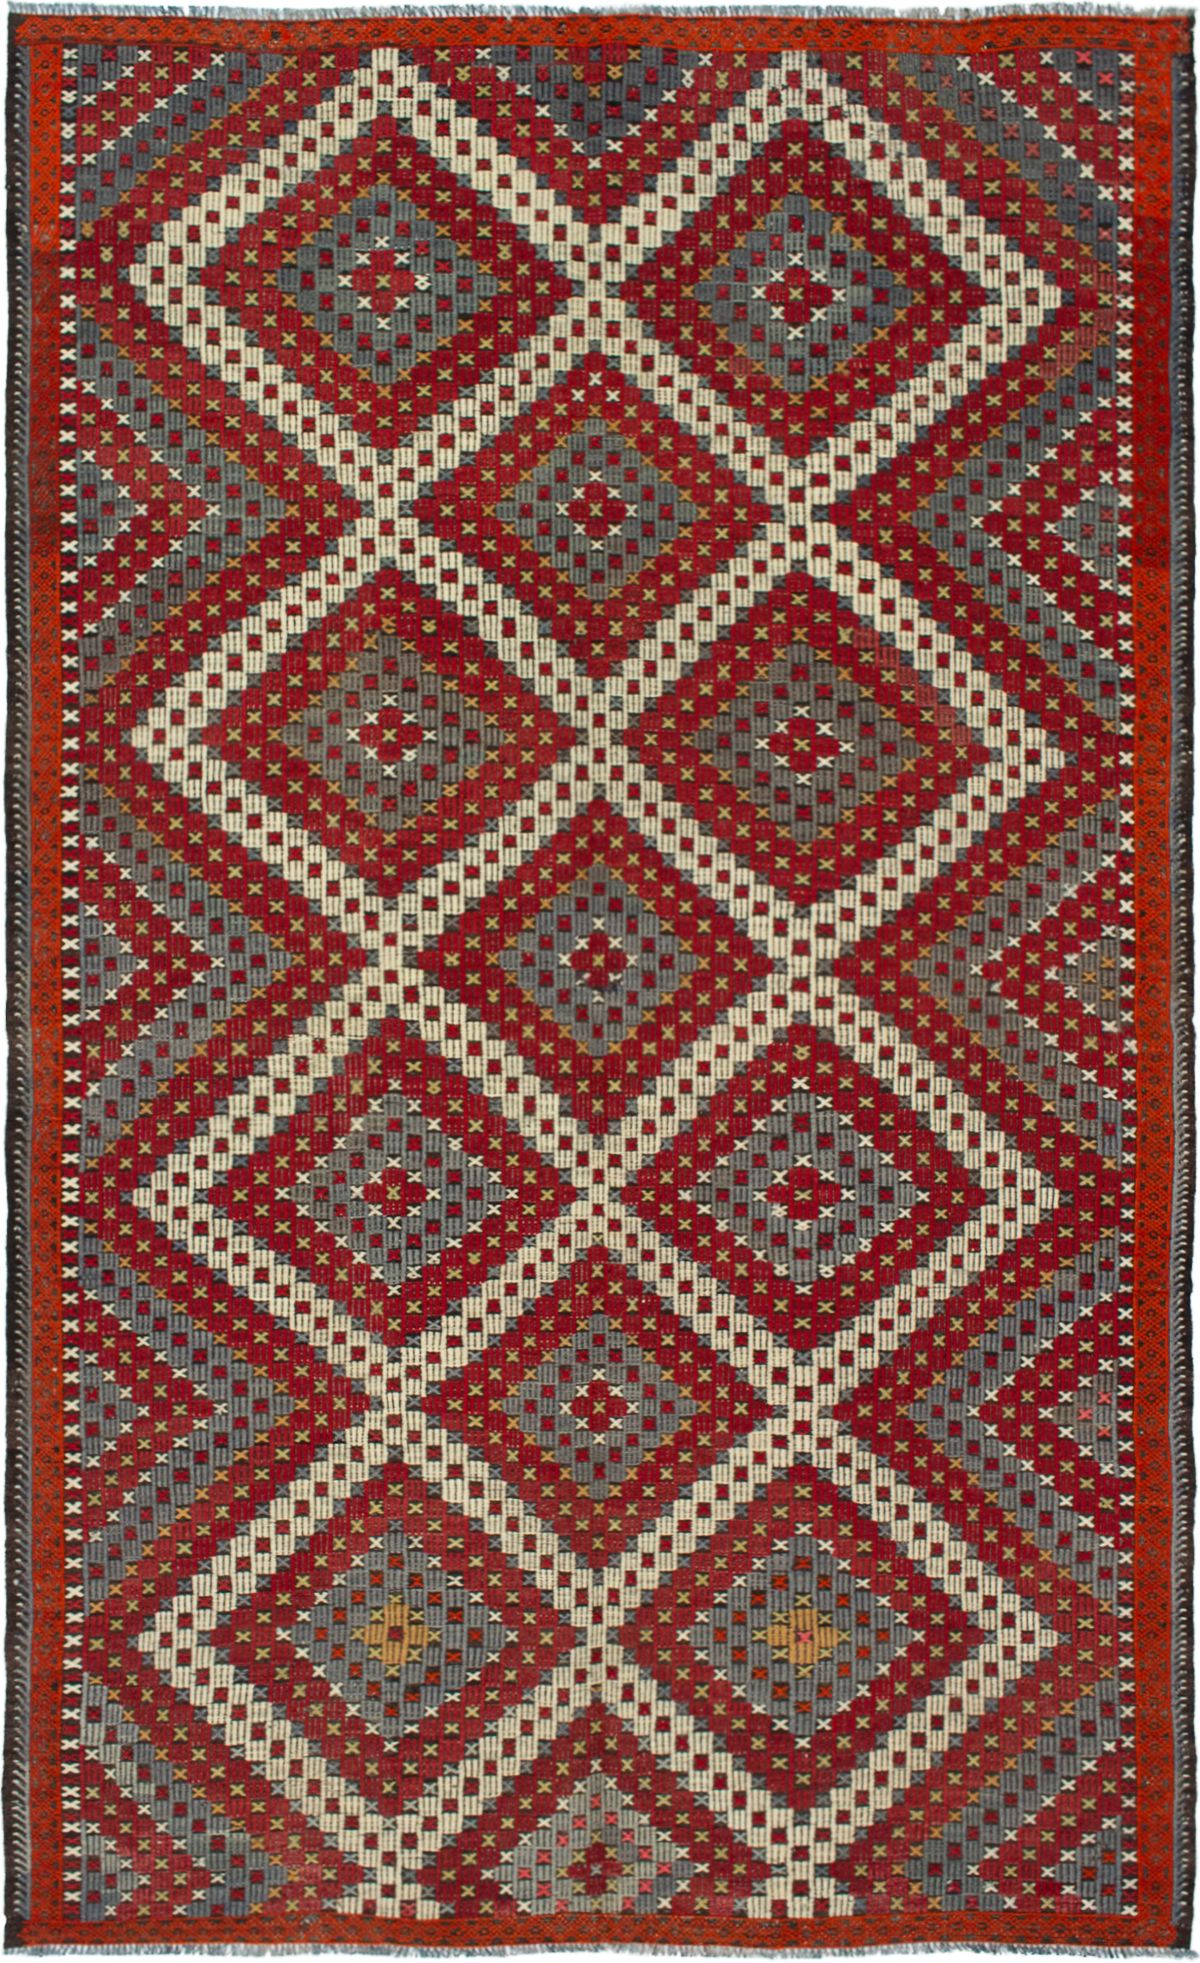 Hand woven Yoruk Red Wool Tapestry Kilim 6'5" x 10'4"  Size: 6'5" x 10'4"  